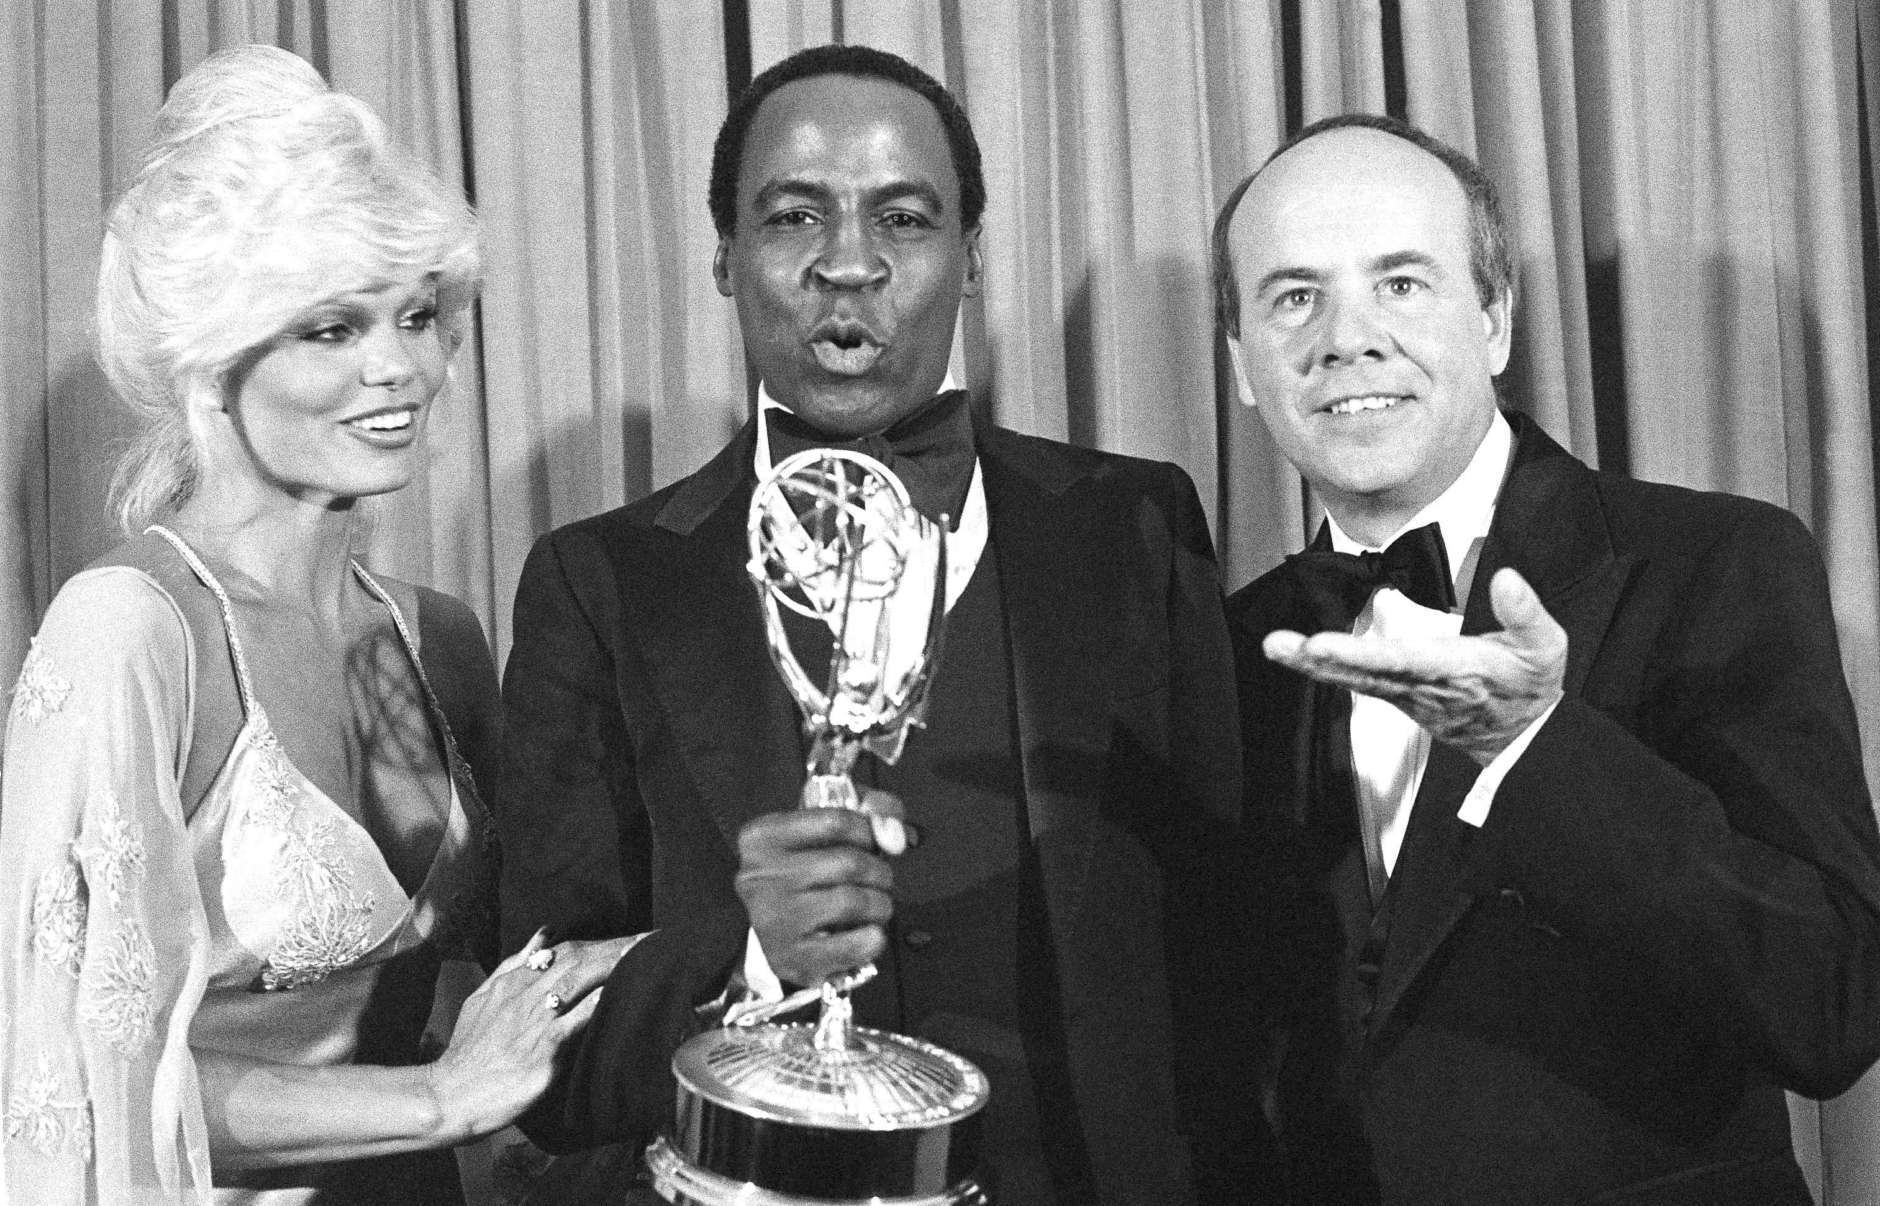 FILE - In this Sept. 10, 1979 file photo, Robert Guillaume, center, accepts his Emmy Award  for best supporting actor in a comedy-variety or music series for his role in "Soap" from Tim Conway, right, and Loni Anderson at the 31st Emmy Awards in Los Angeles.  Guillaume, who won Emmy Awards for his roles on “Soap” and “Benson,” died Tuesday, Oct. 24, 2017 in Los Angeles at age 89. Guillaume’s widow Donna Brown Guillaume says he had been battling prostate cancer. (AP Photo/Reed Saxon, File)